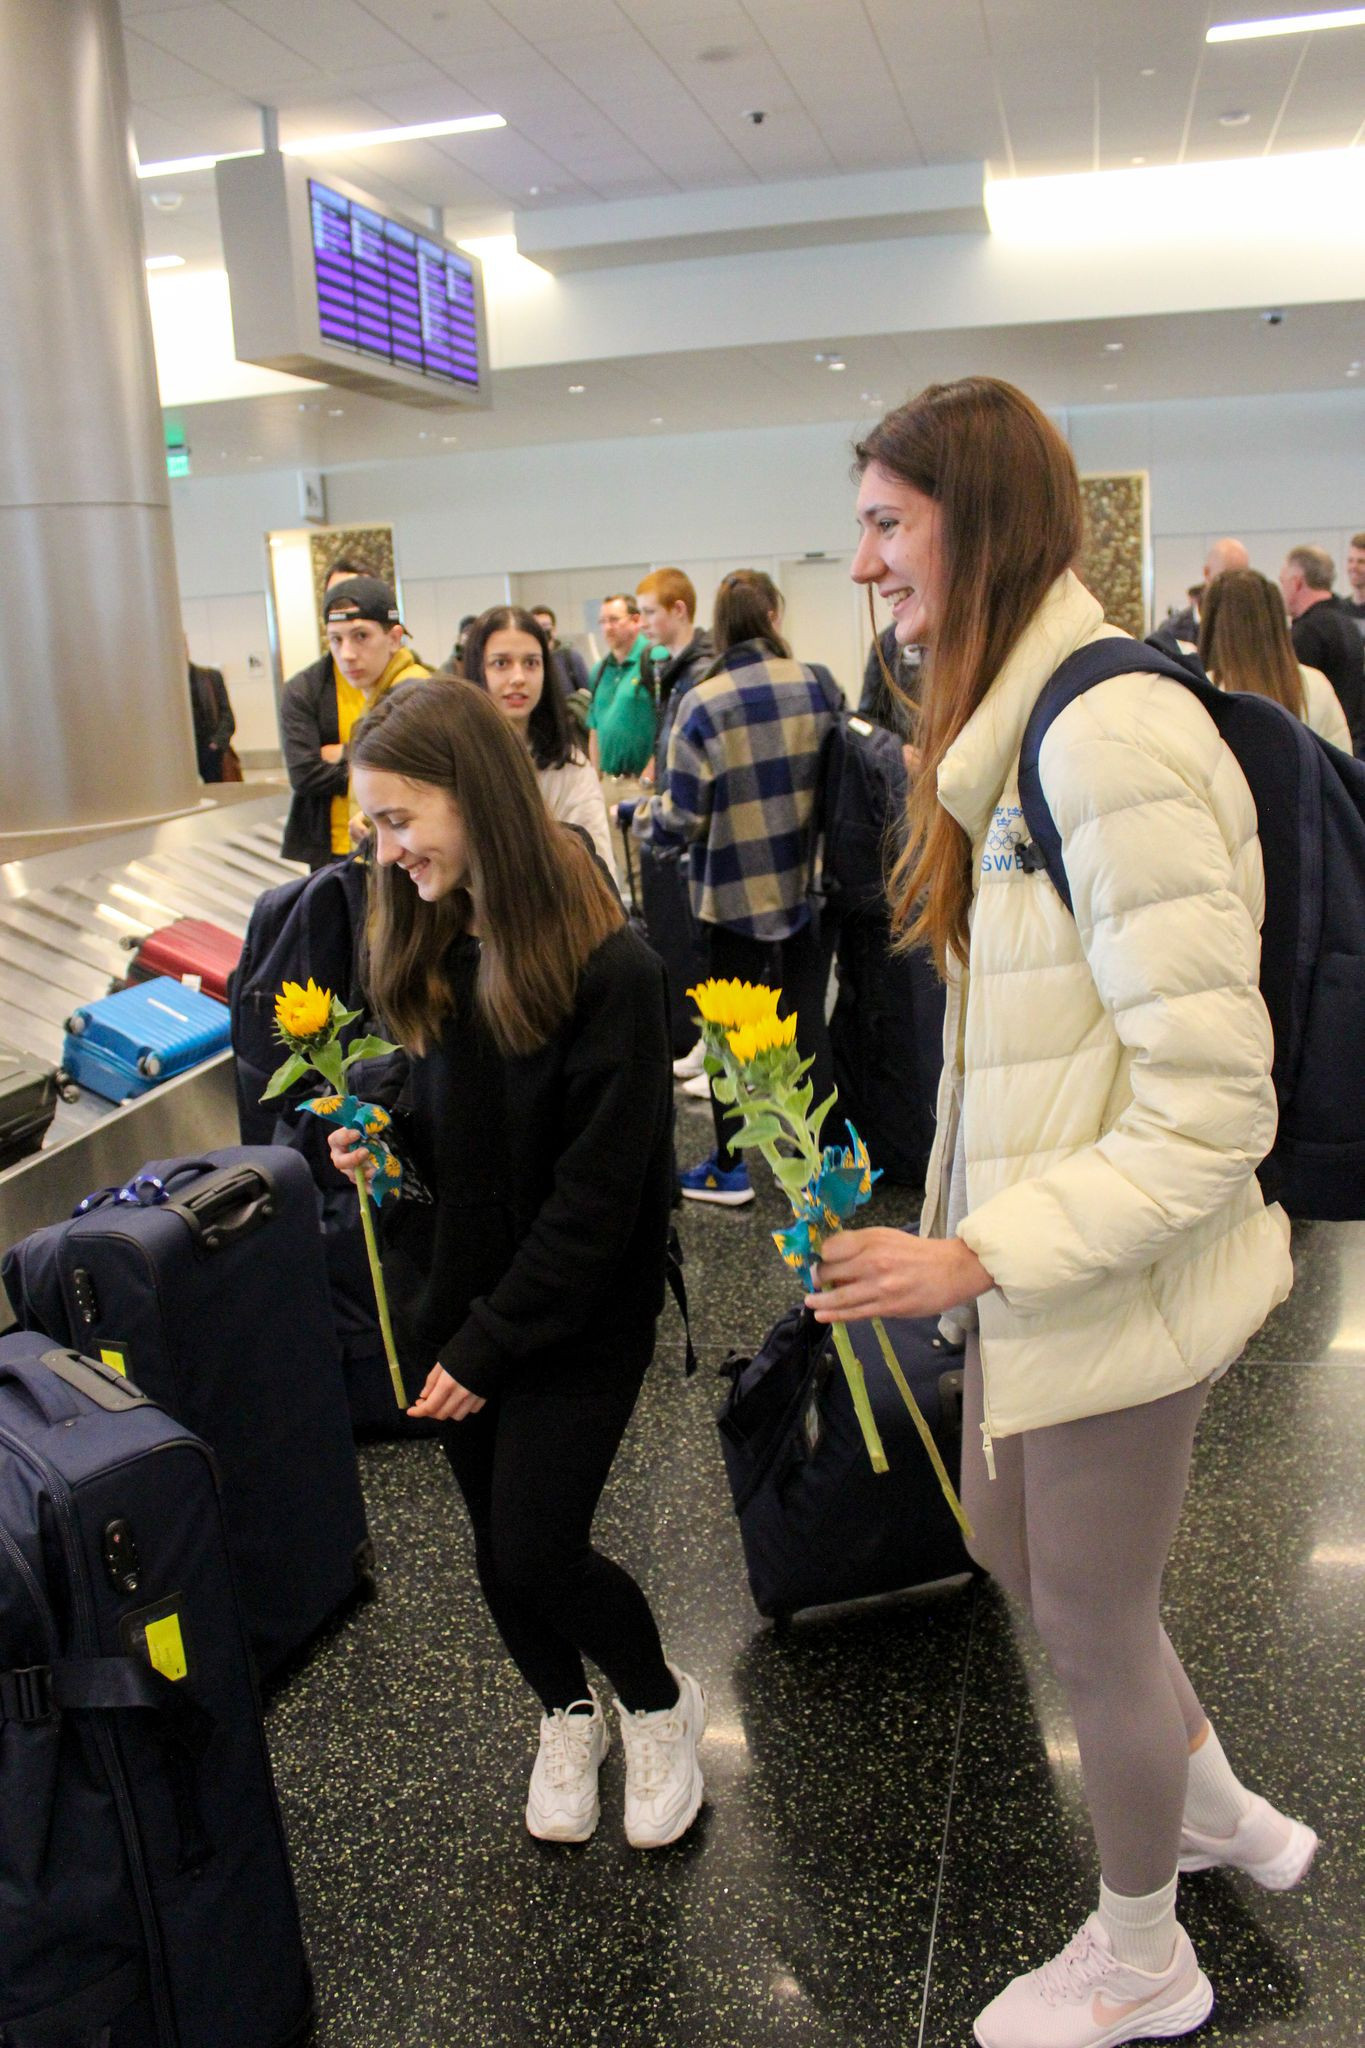 Ukrainians receiving flowers on arrival in the United States ©UOLF